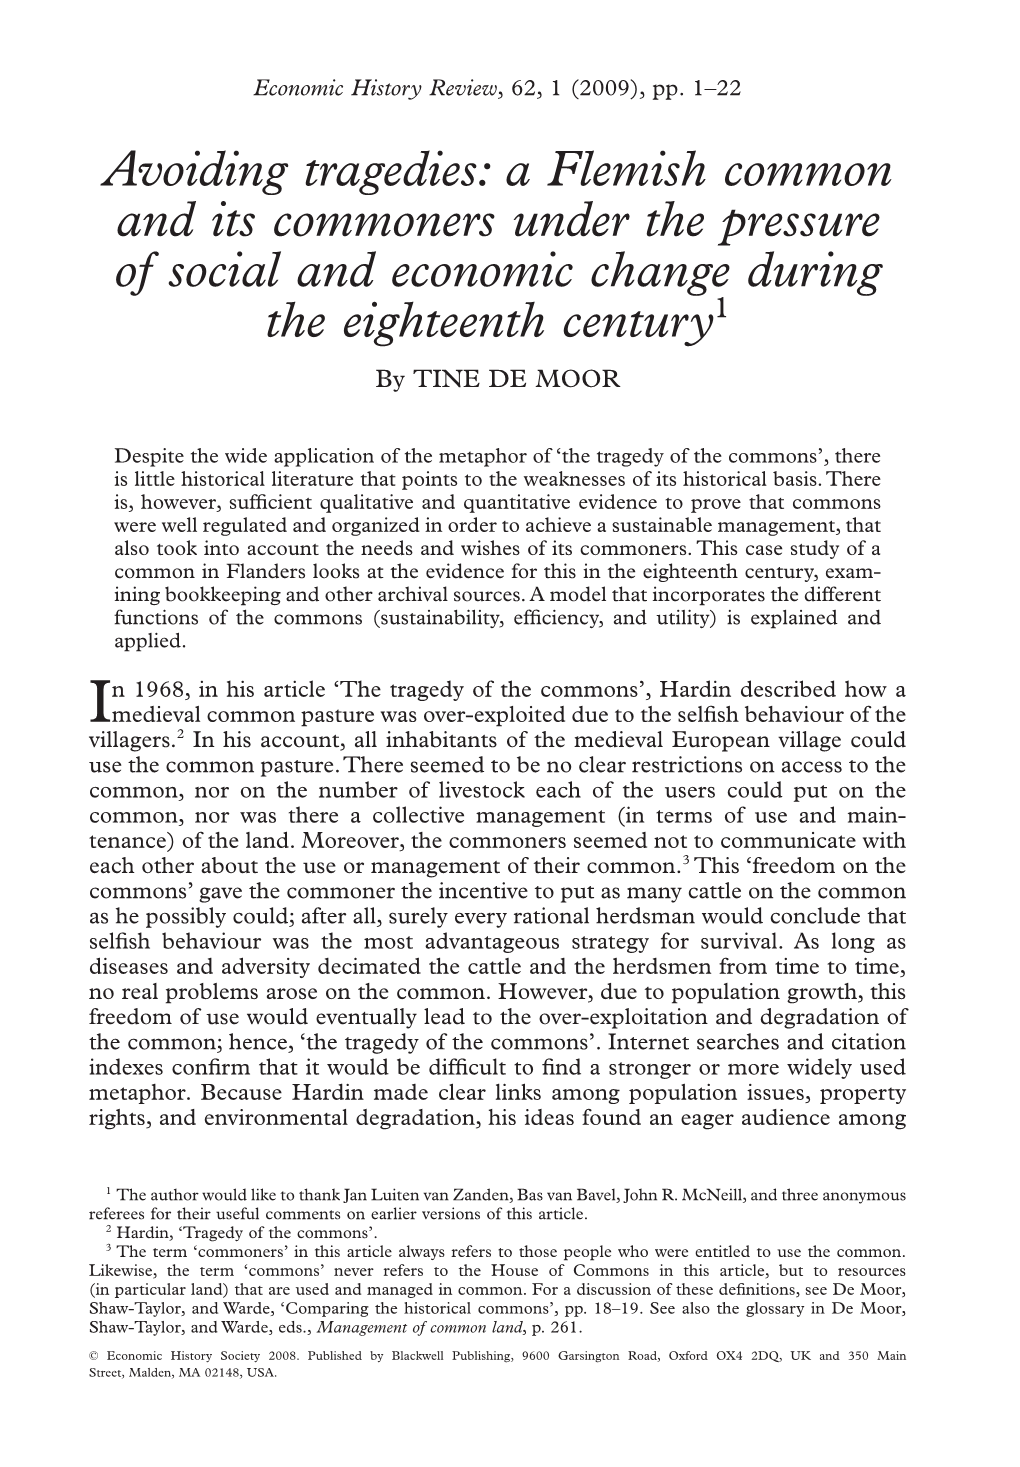 Avoiding Tragedies: a Flemish Common and Its Commoners Under the Pressure of Social and Economic Change During the Eighteenth Century1 by TINE DE MOOR